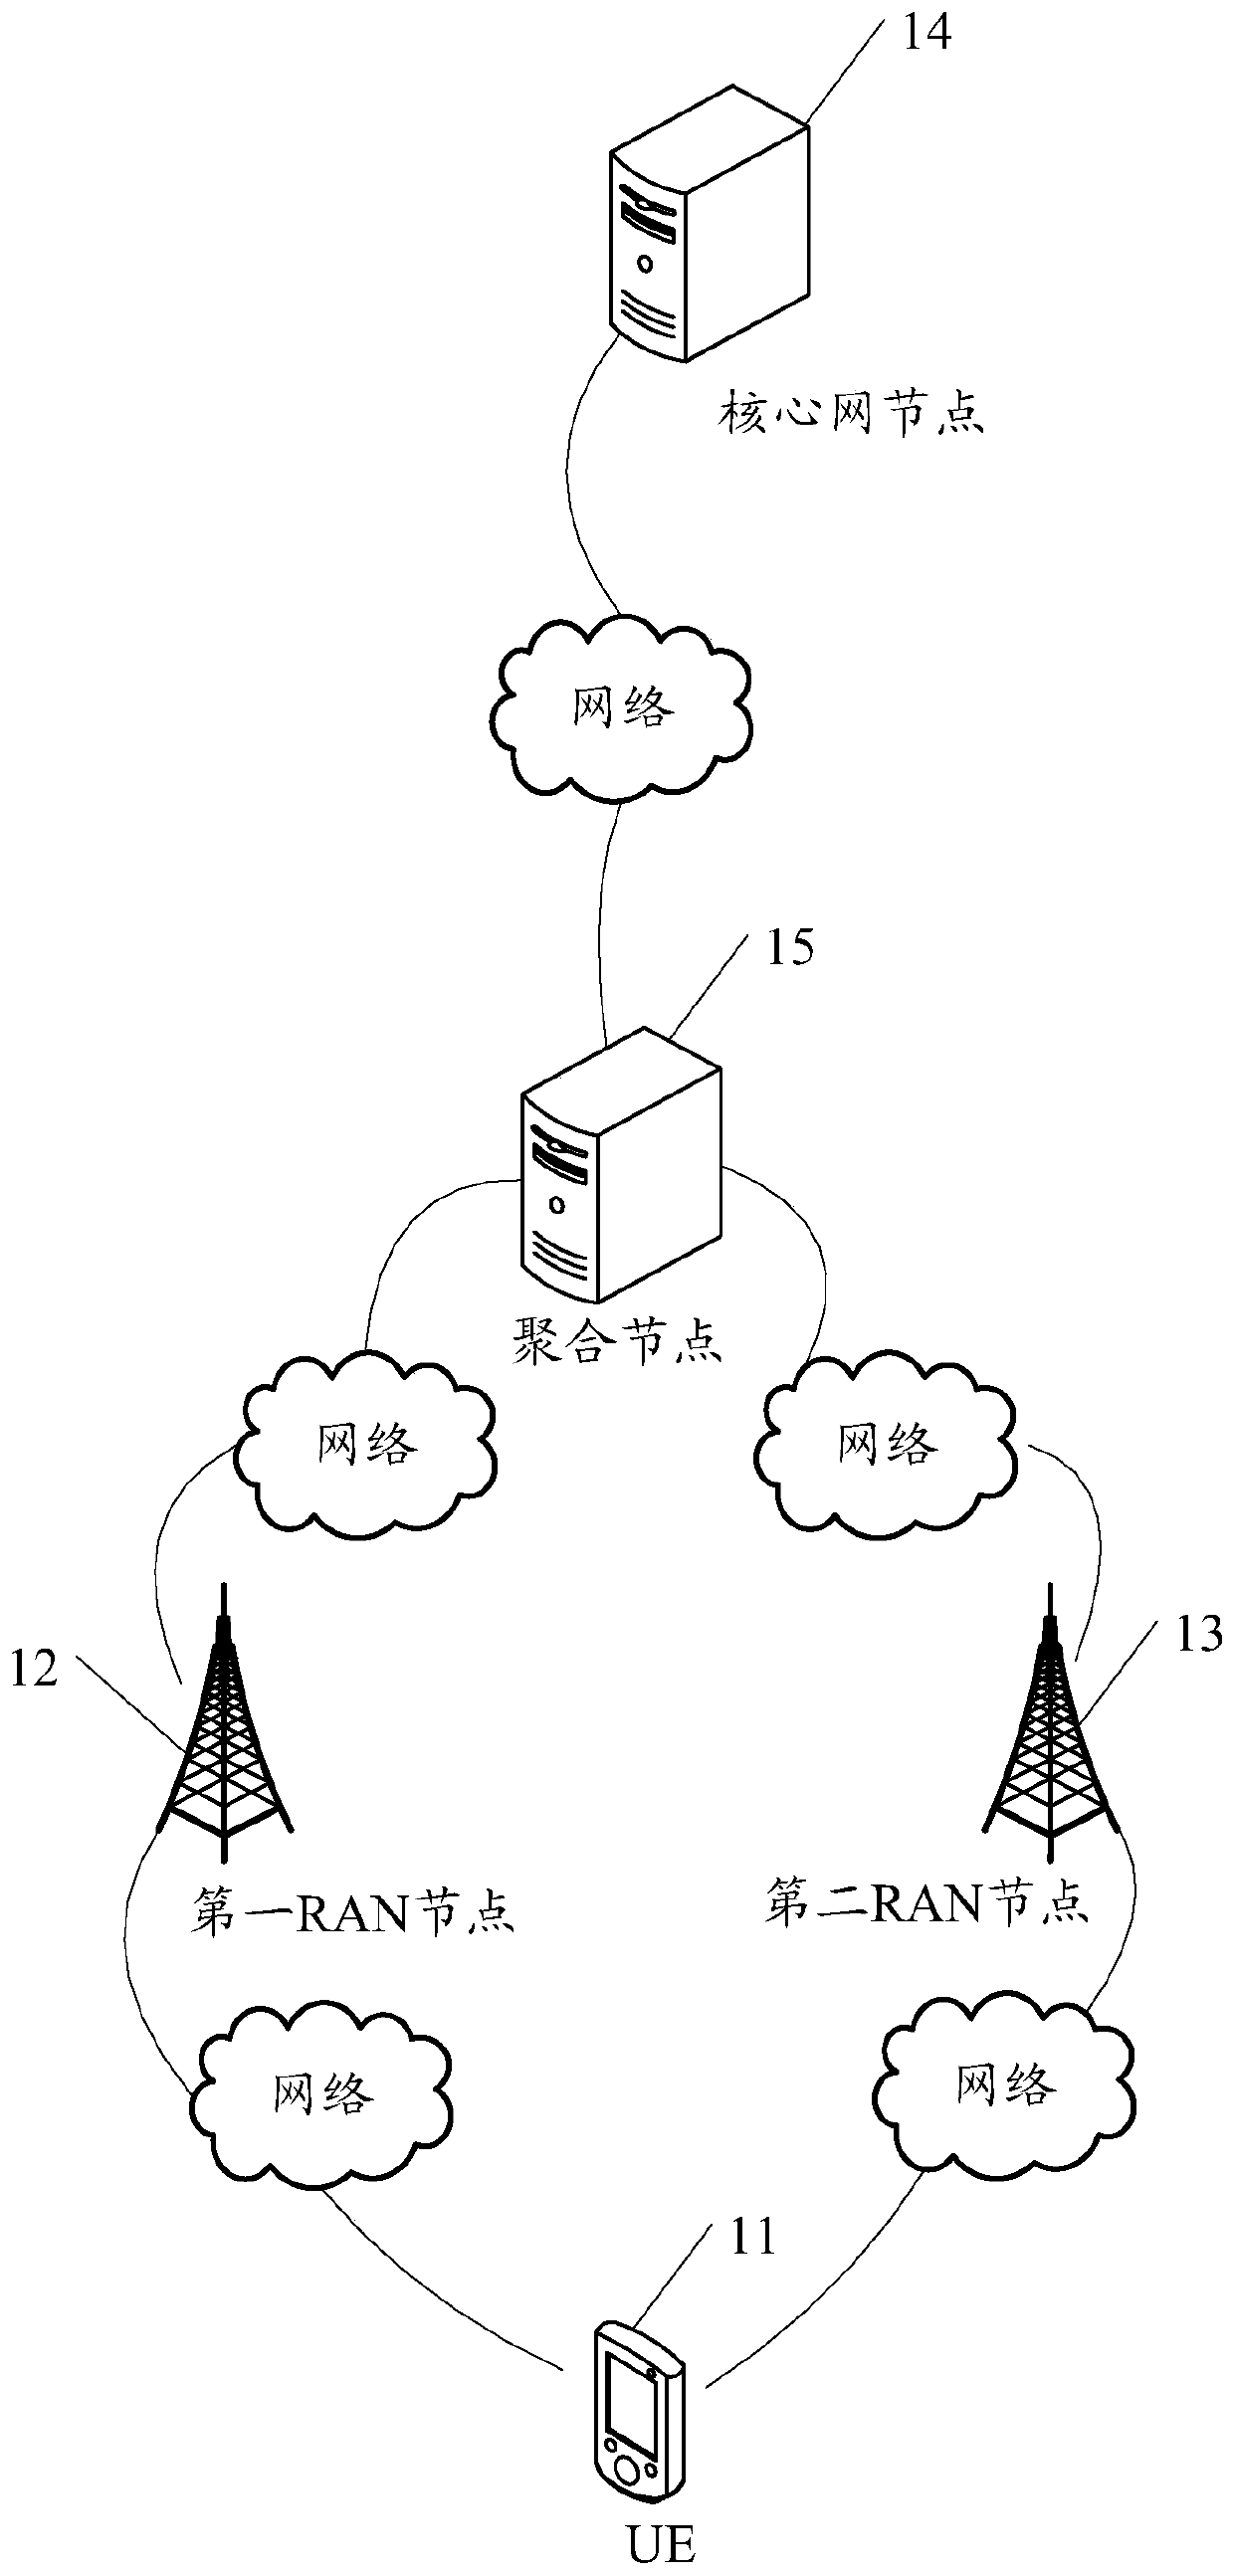 A network access method, related equipment and system